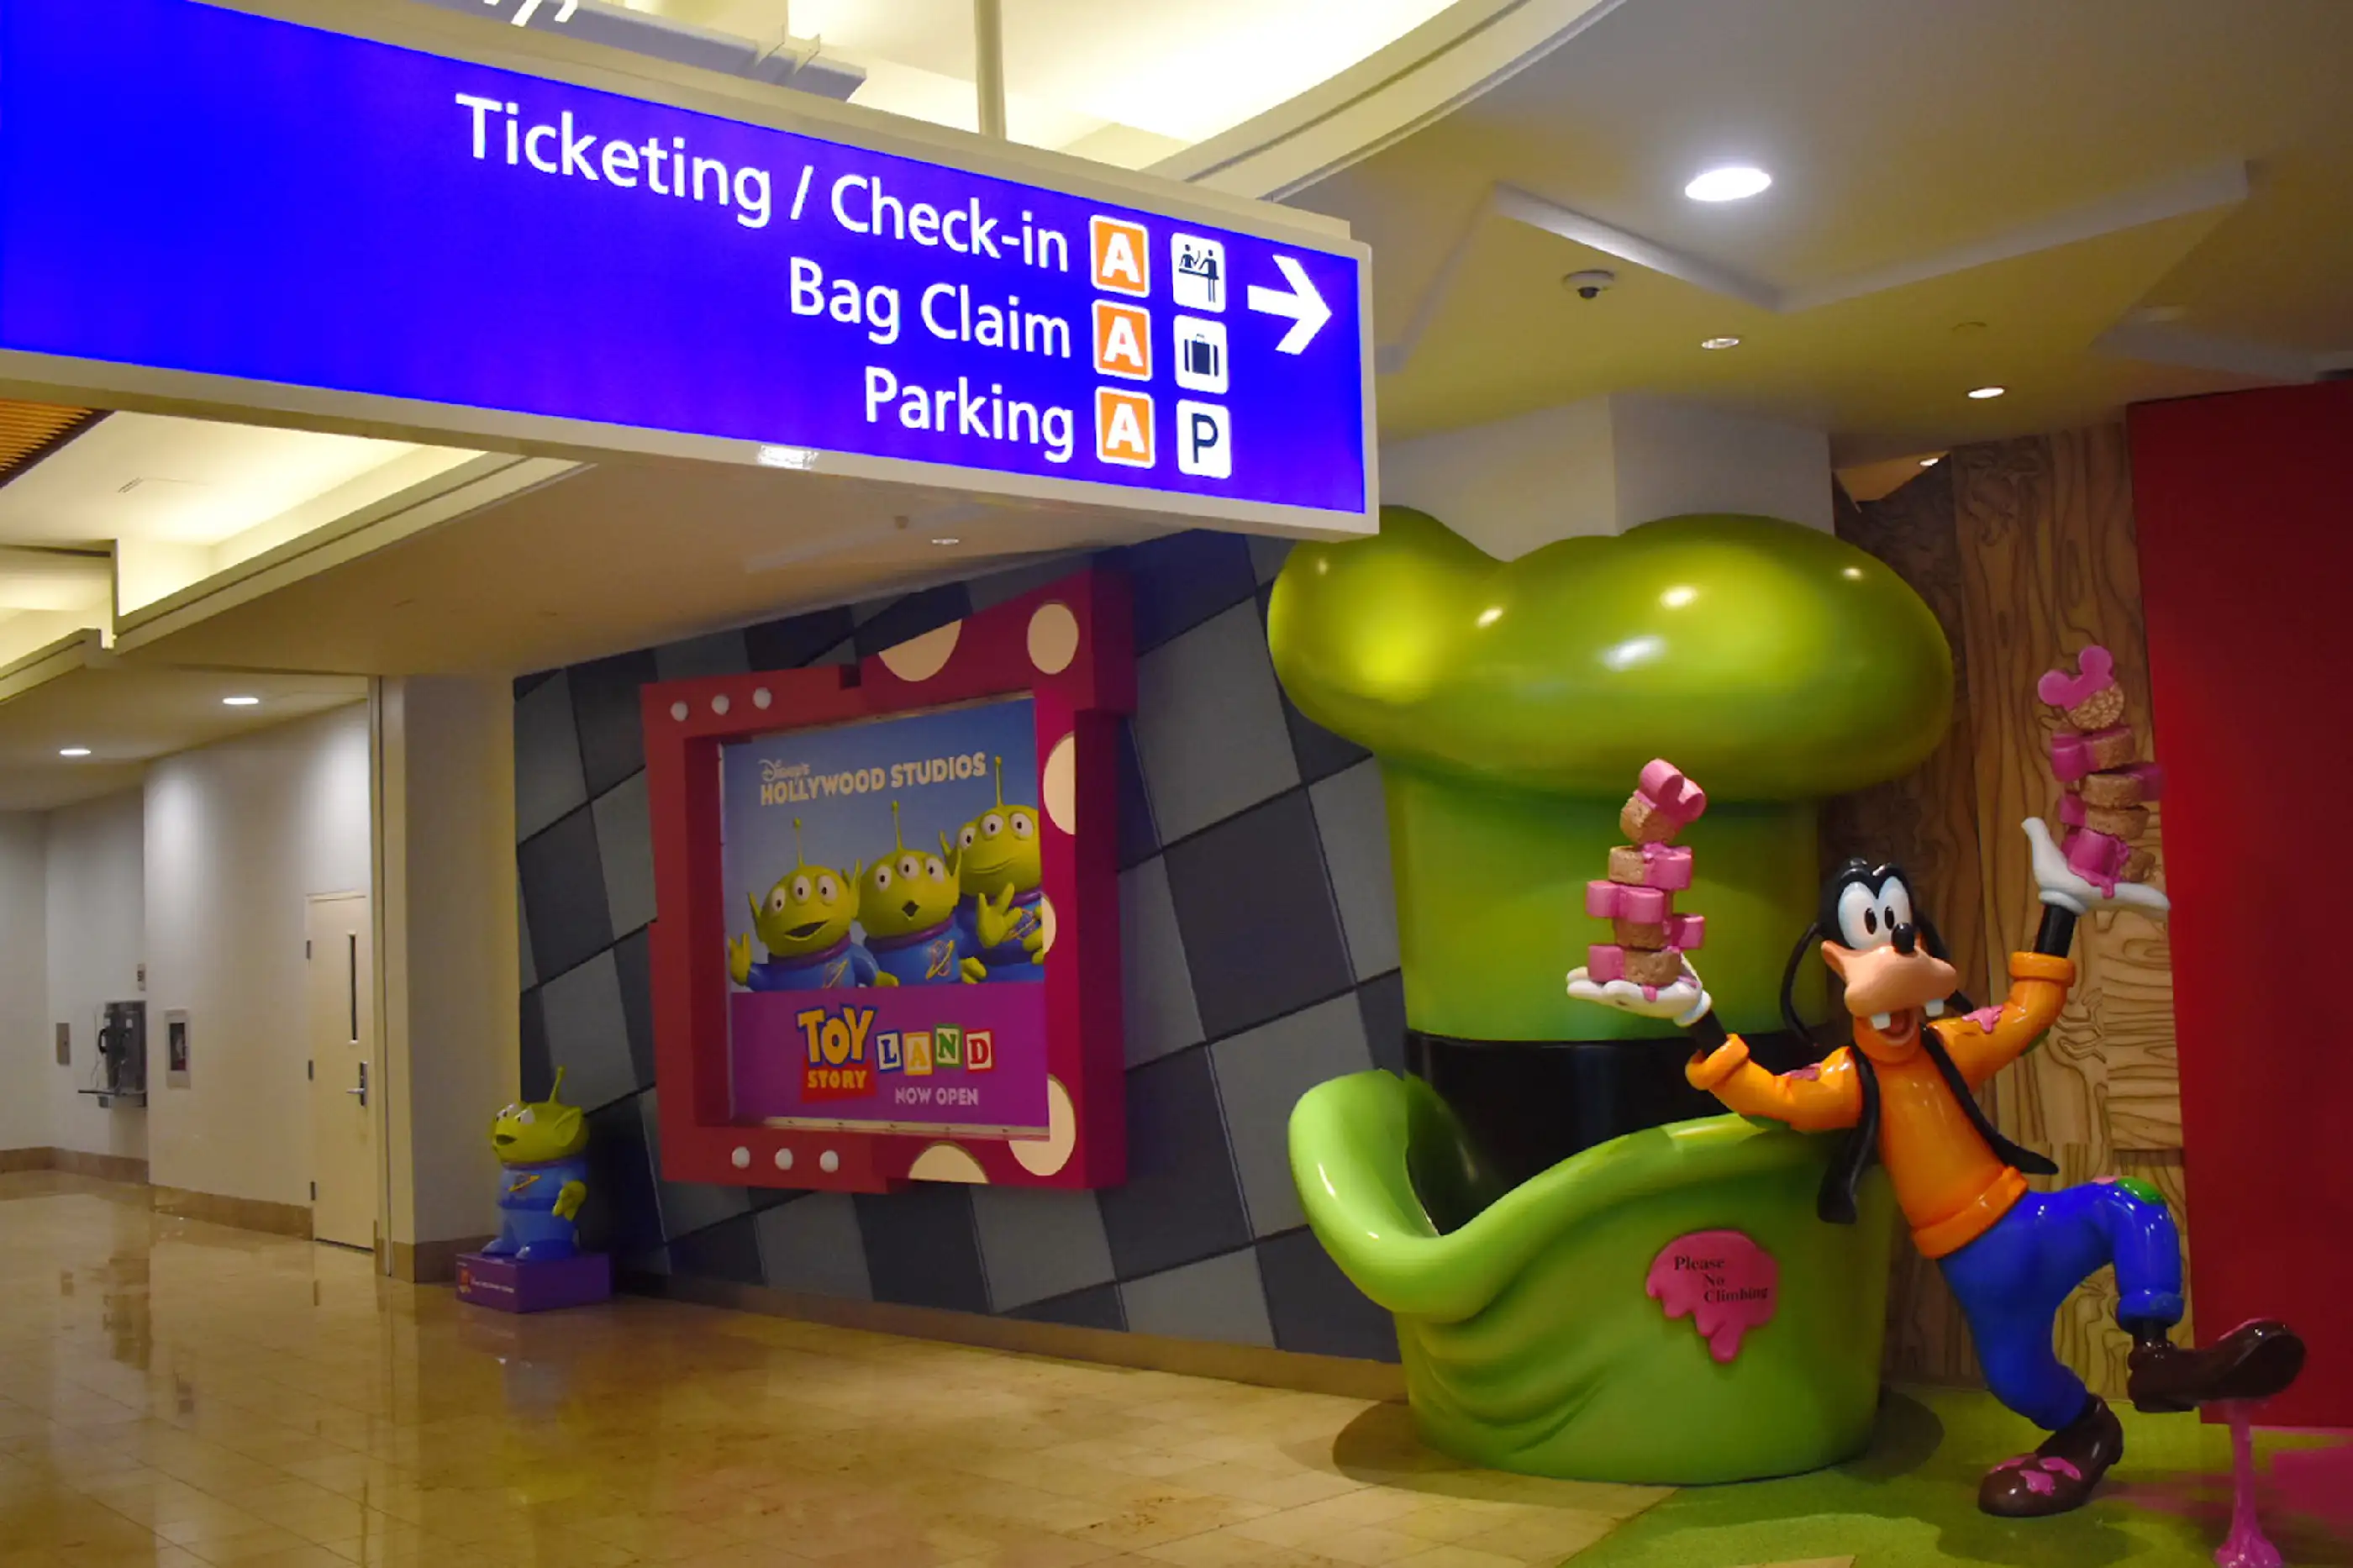 Orlando, Florida; August 28, 2018: Ticketing and Check in information sign at the airport and Goofy.